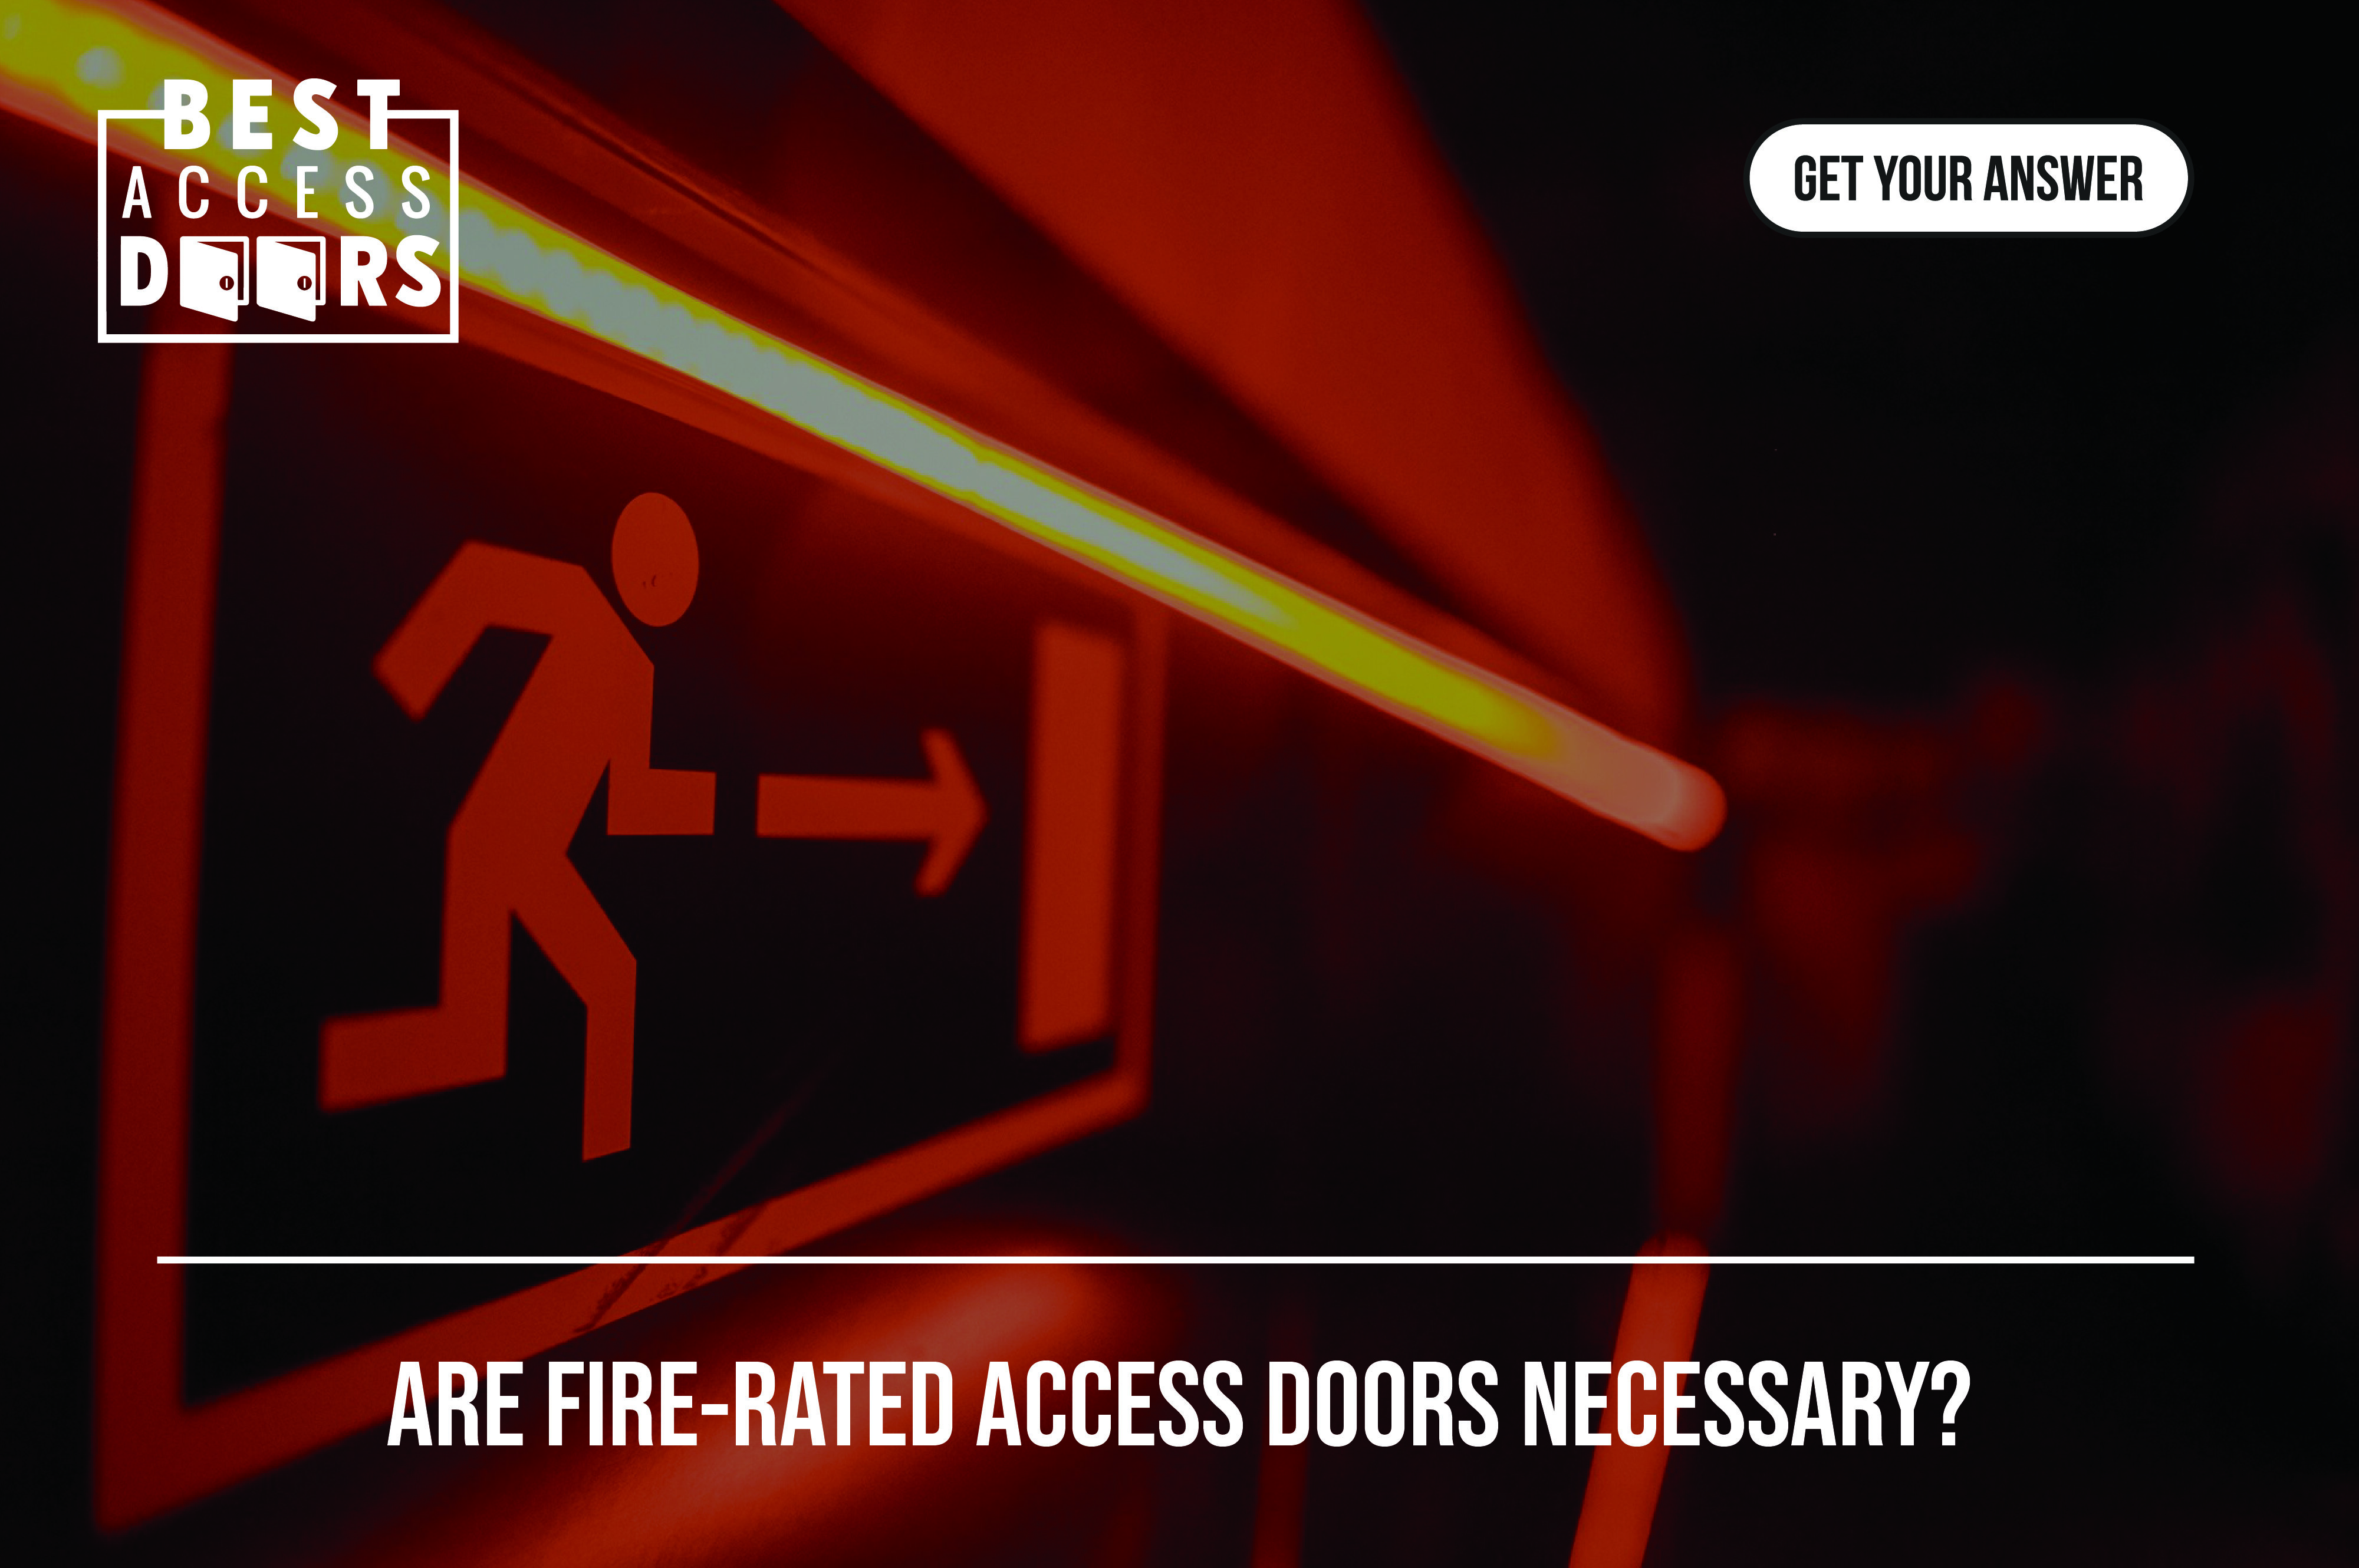 Are Fire-Rated Access Doors Necessary